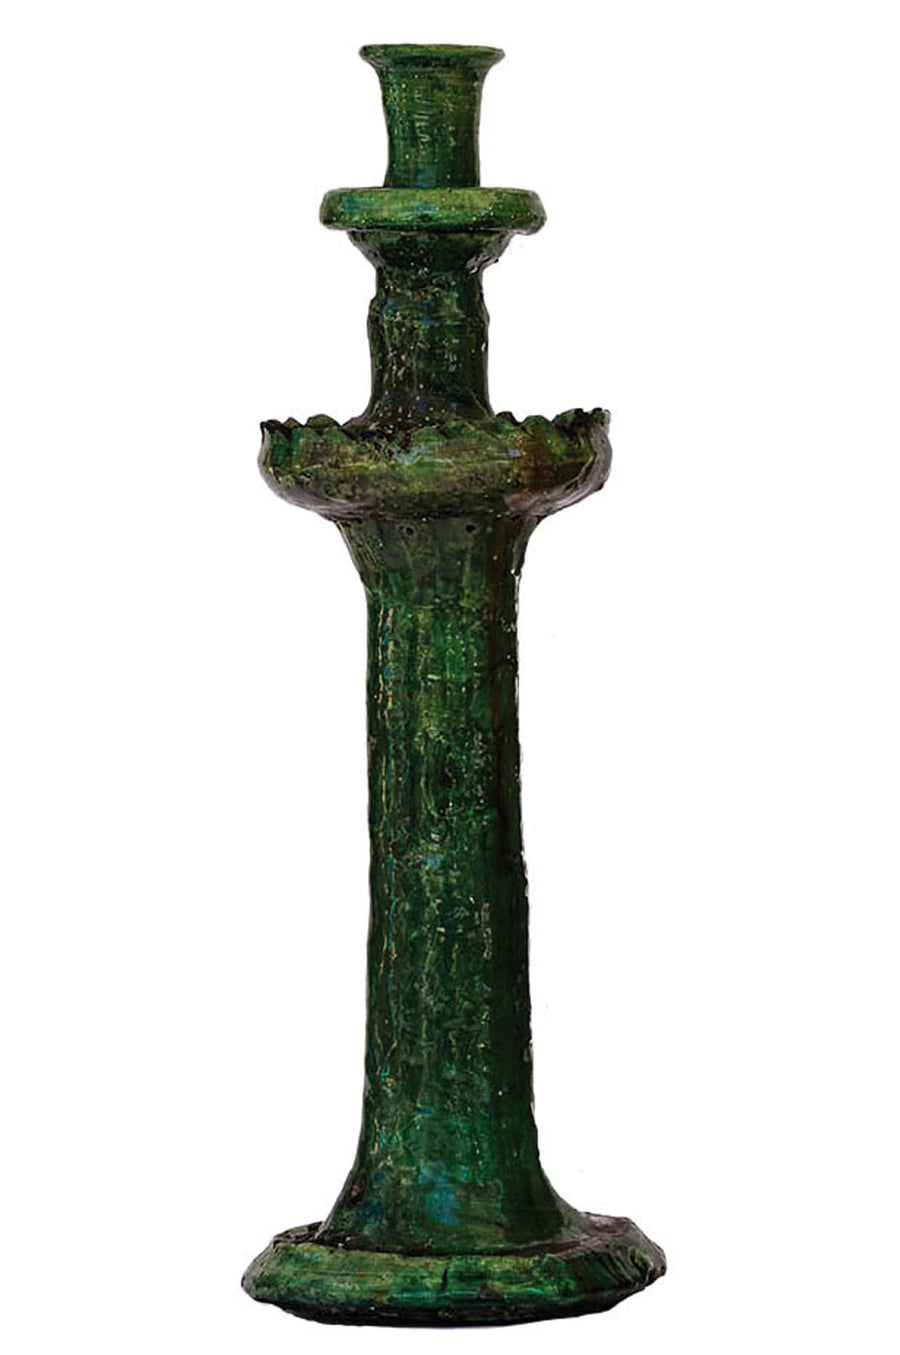 Moroccan Green Candle Holder - Large